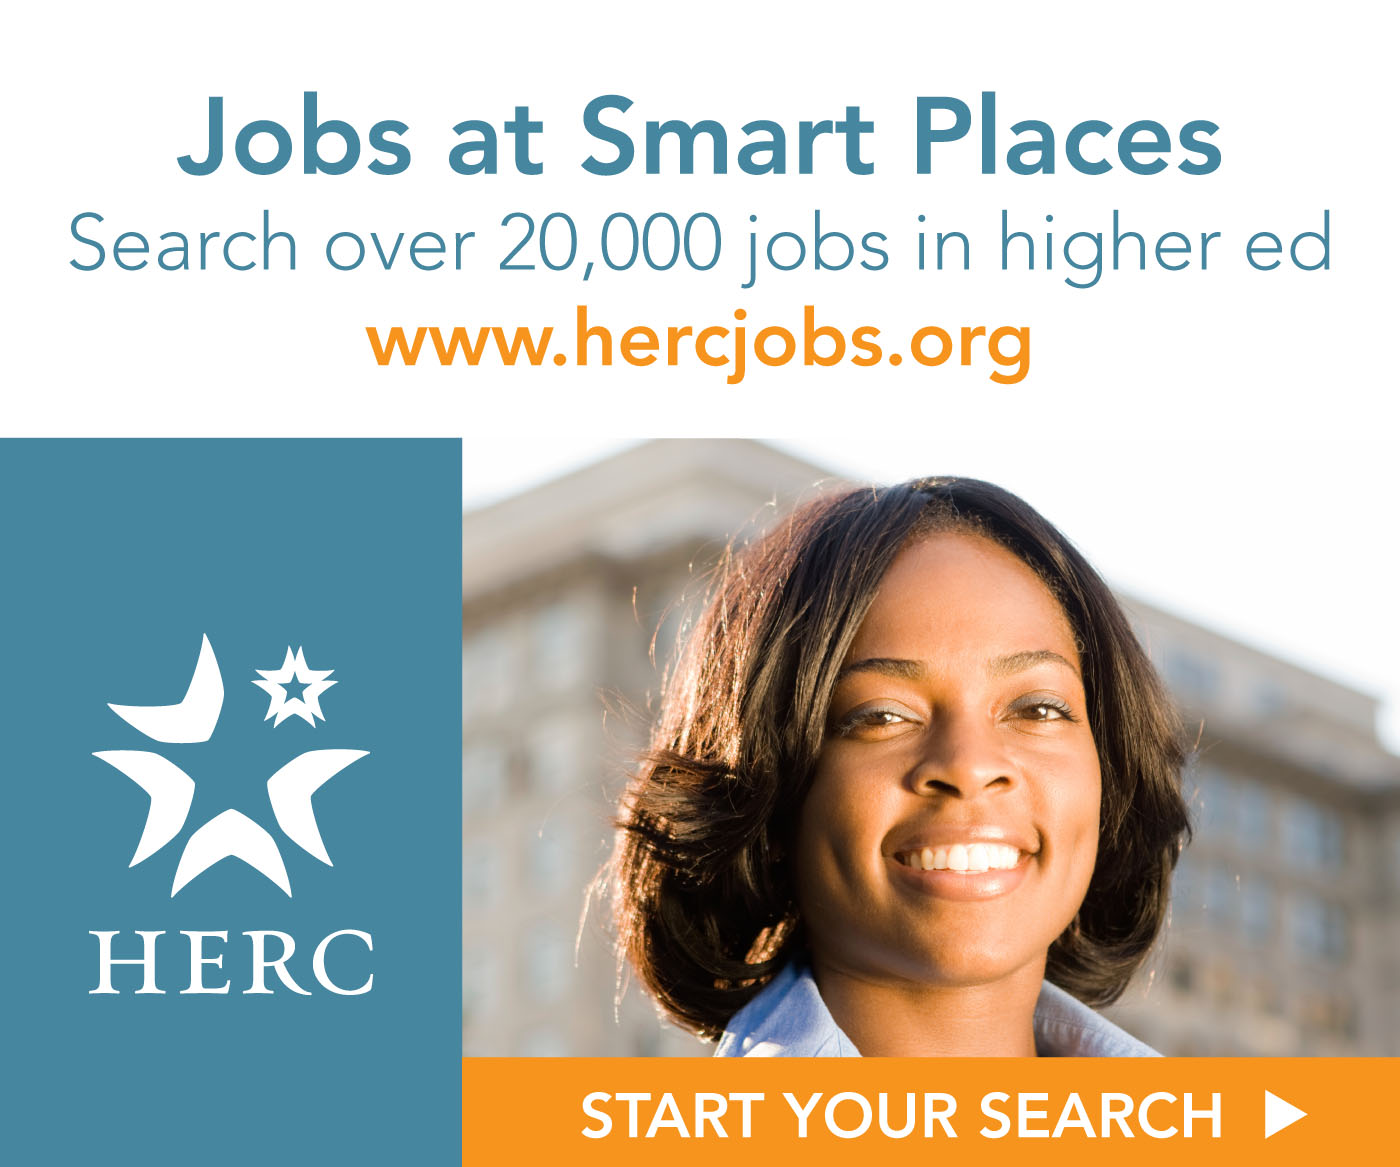 HERC - Jobs at smart places